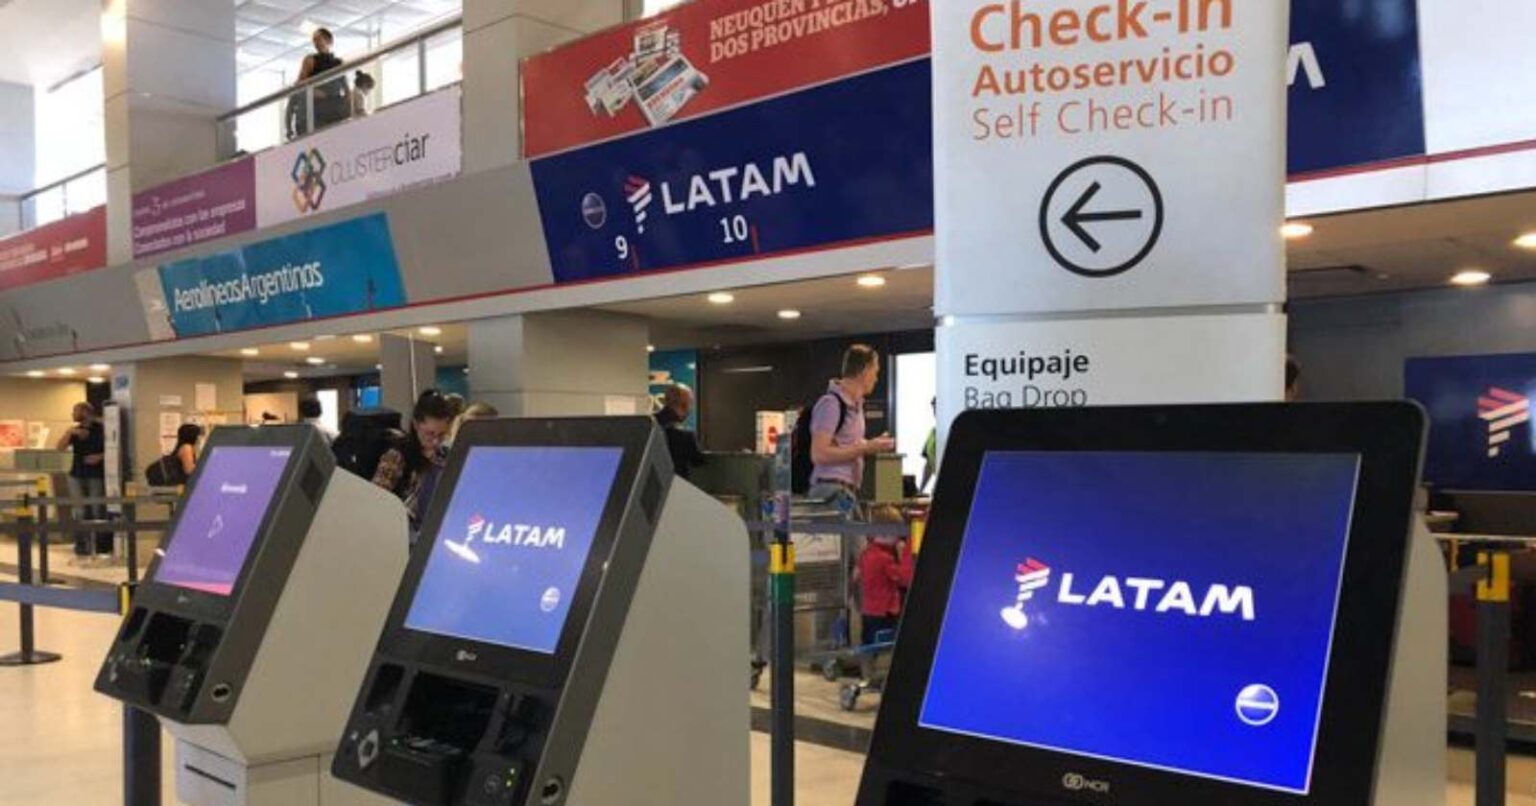 LATAM Brasil Reduces Passenger Wait Times By Almost 50% Through